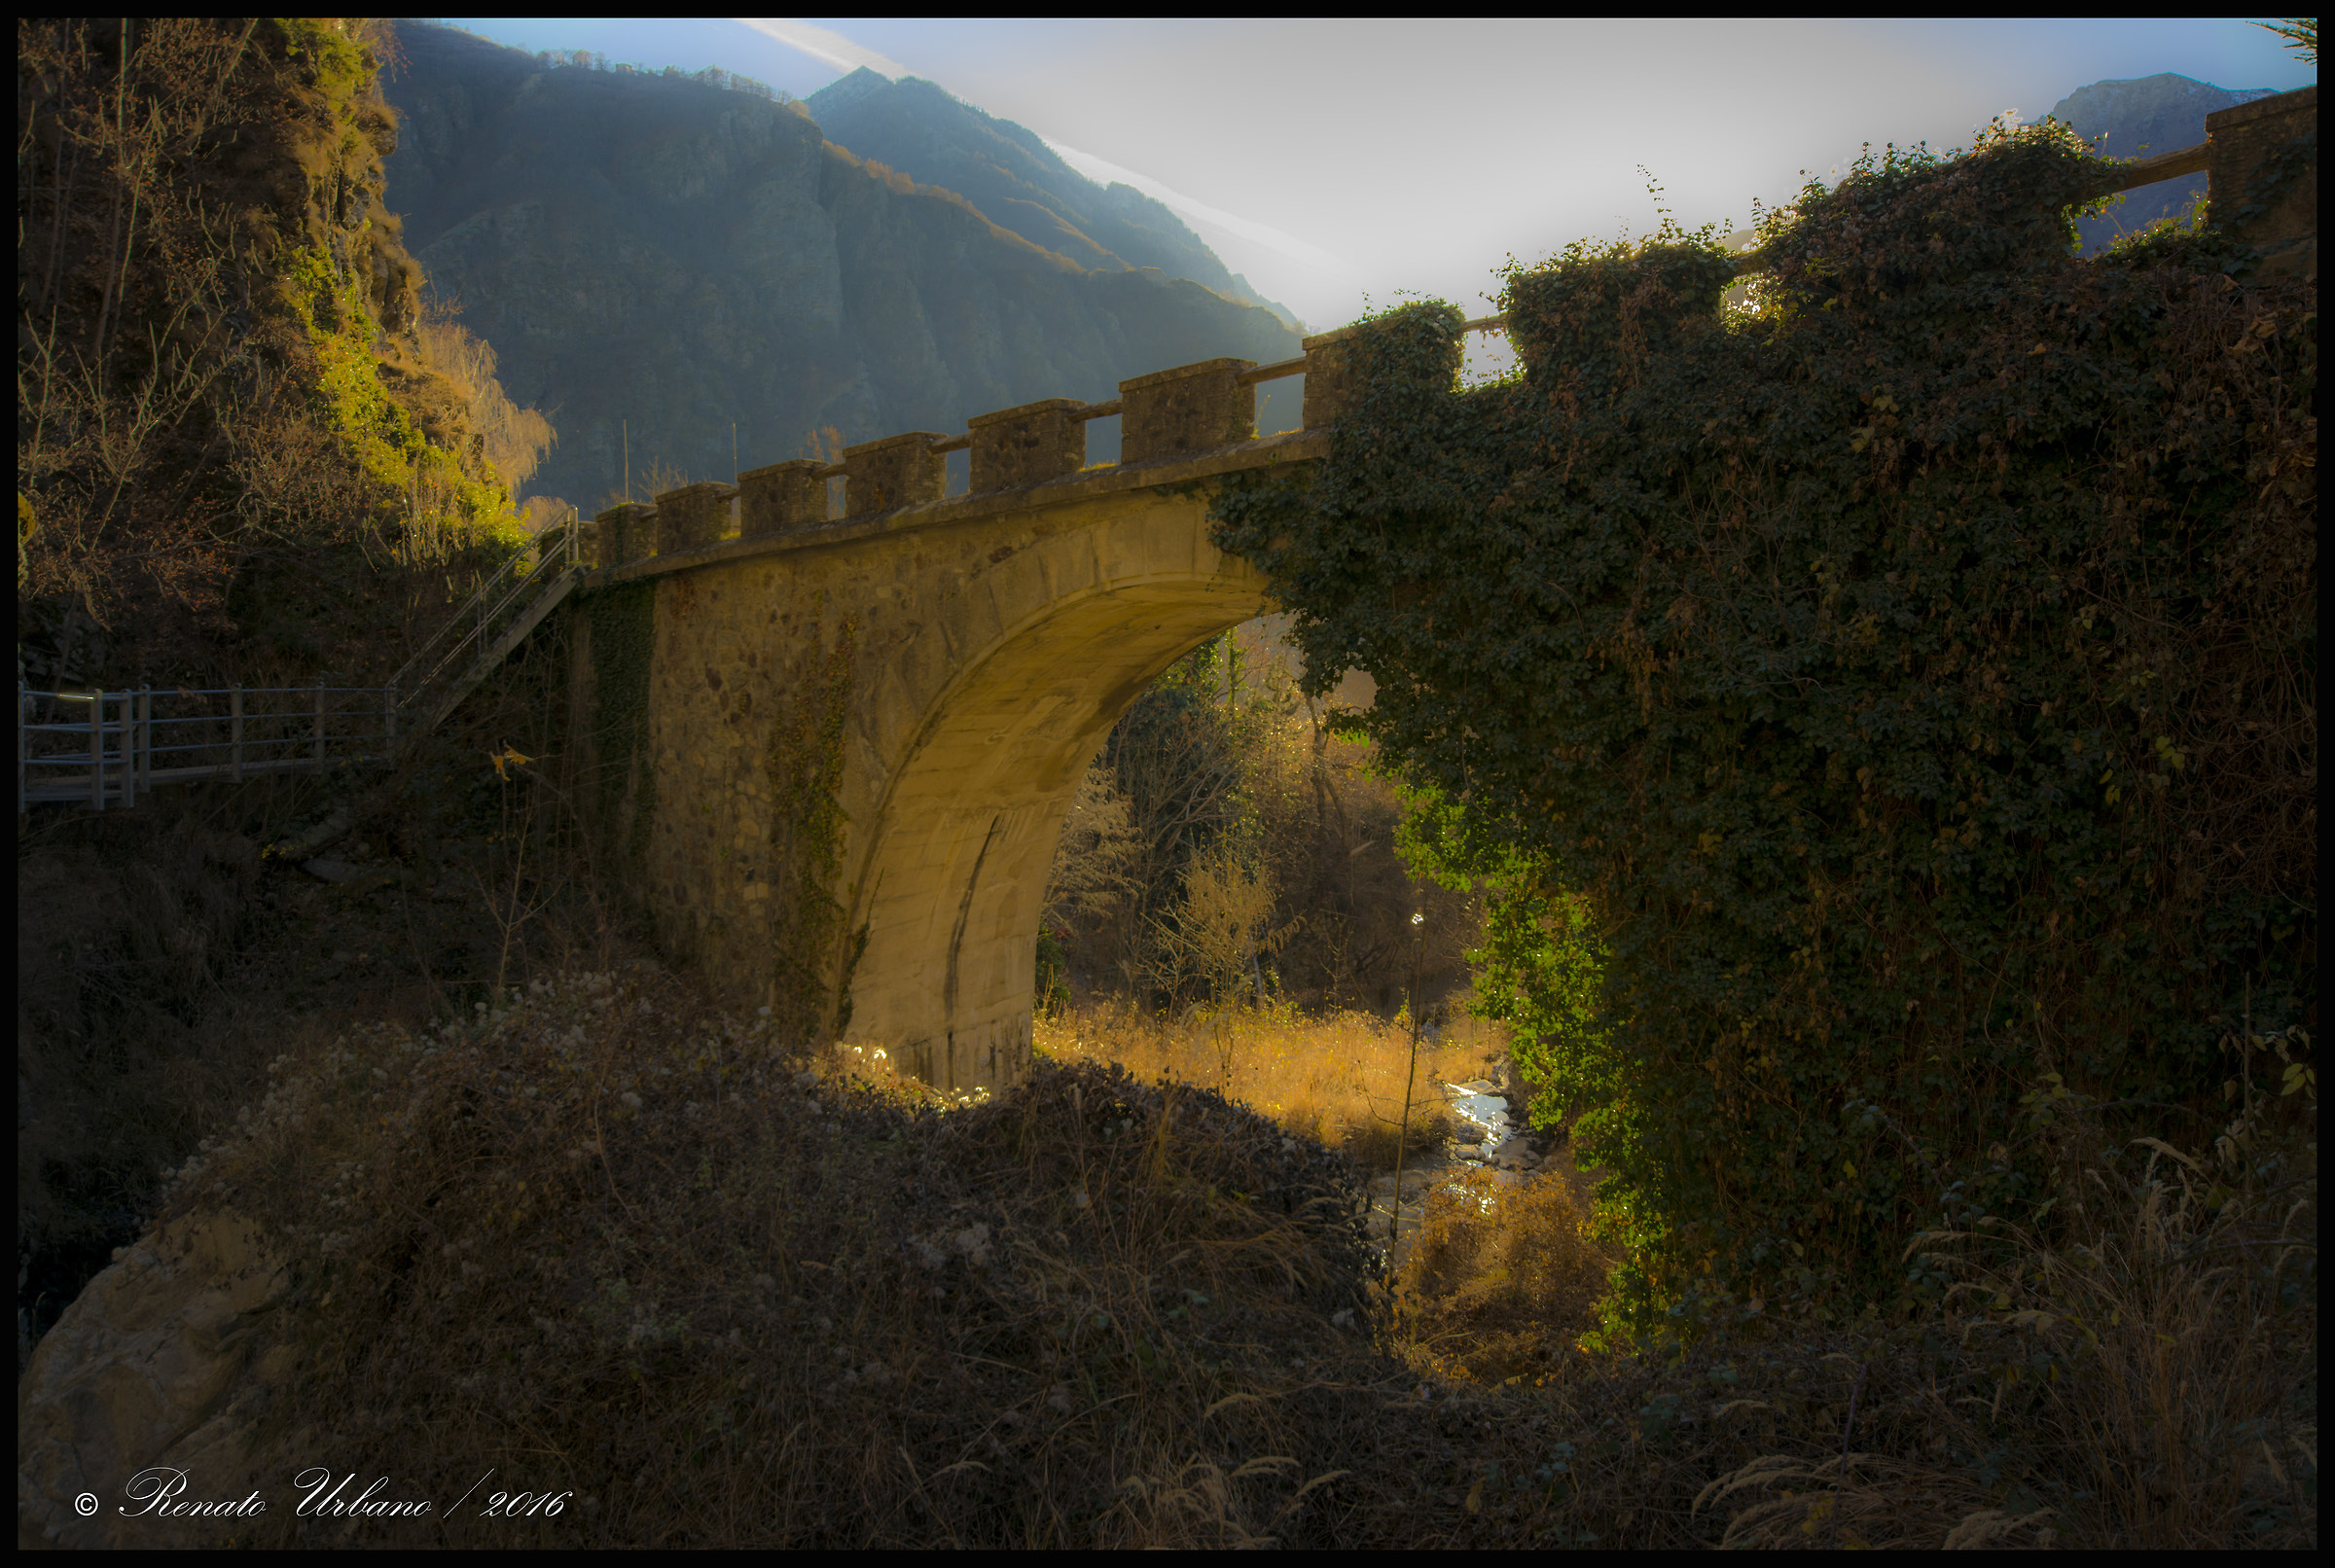 The bridge and the ivy...